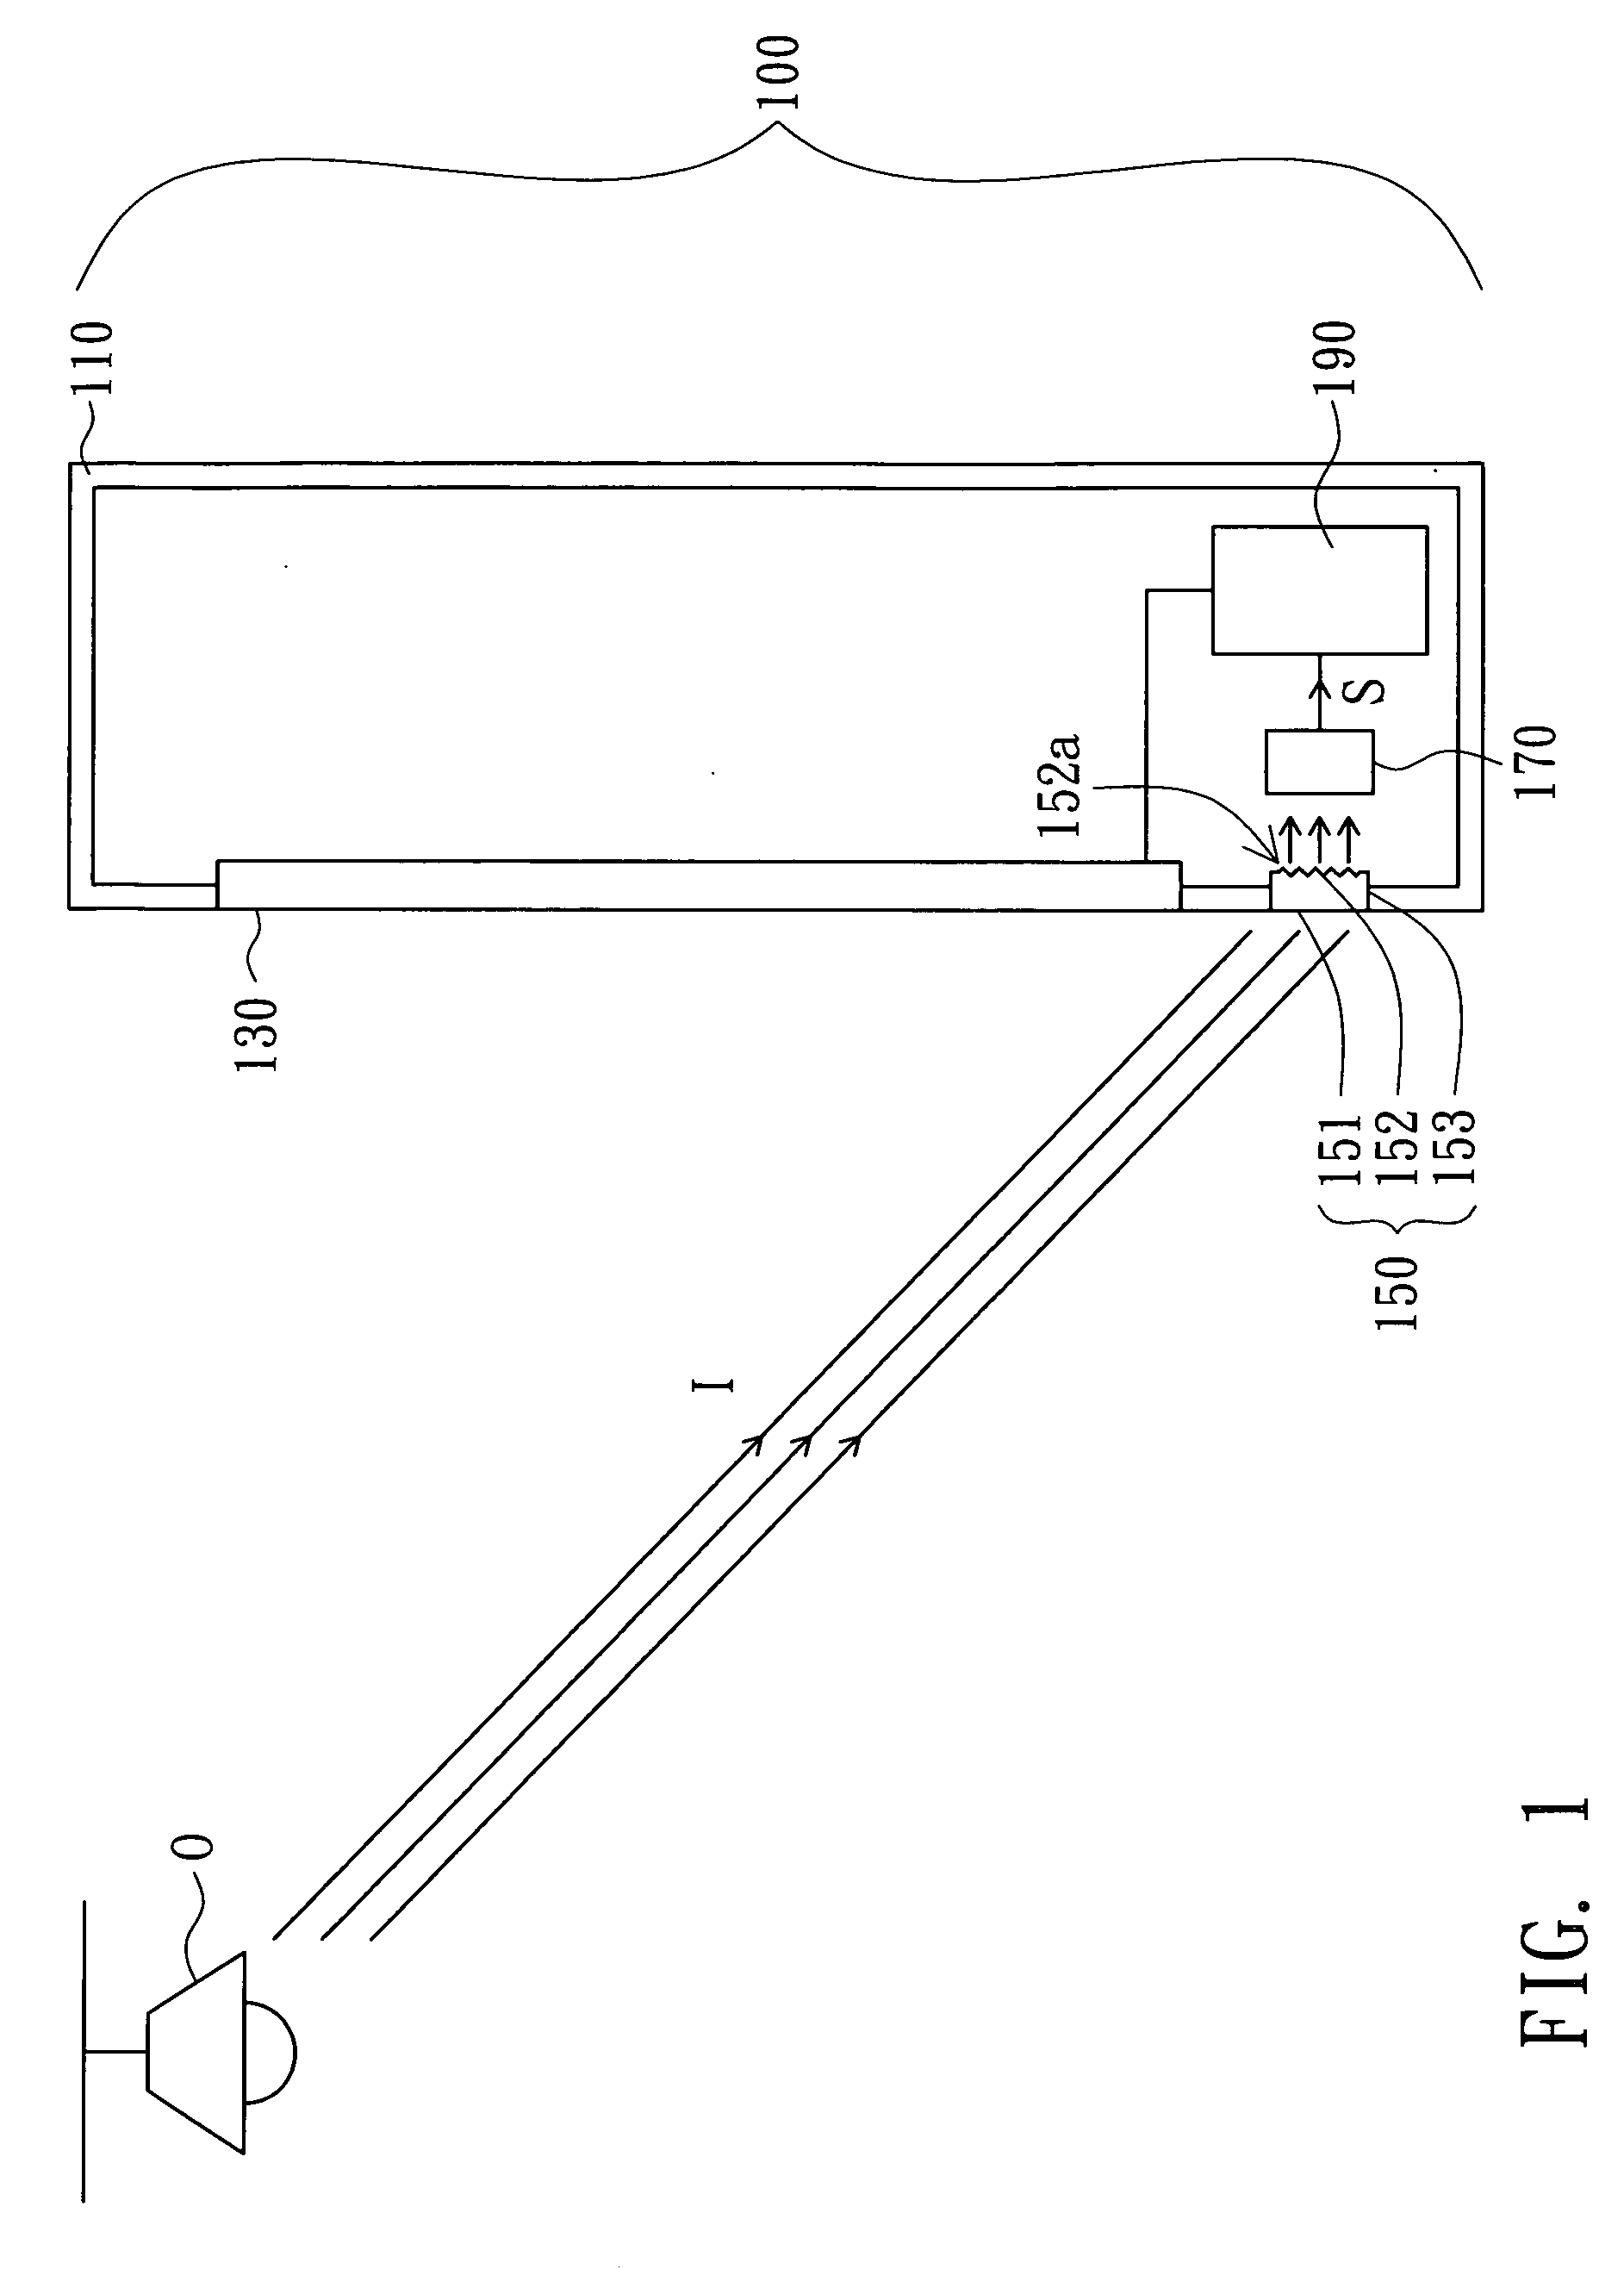 Light guide and display device incorporating the same